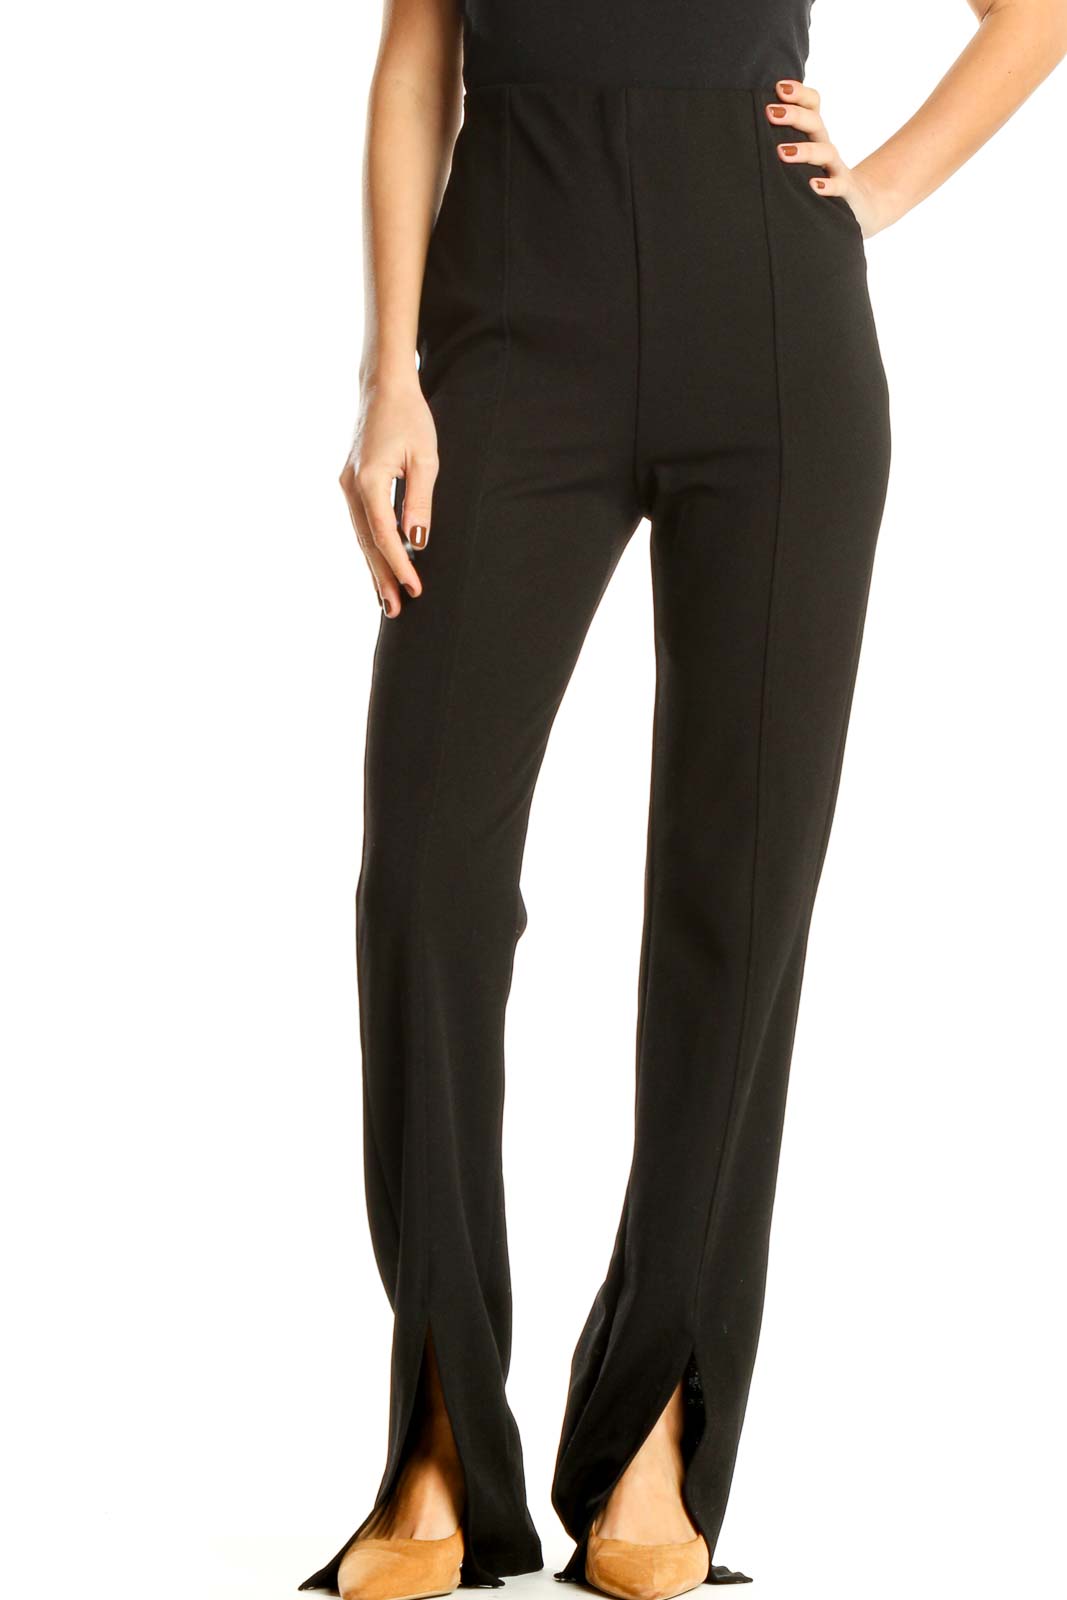 Black High Waisted Slit Classic Pants Front